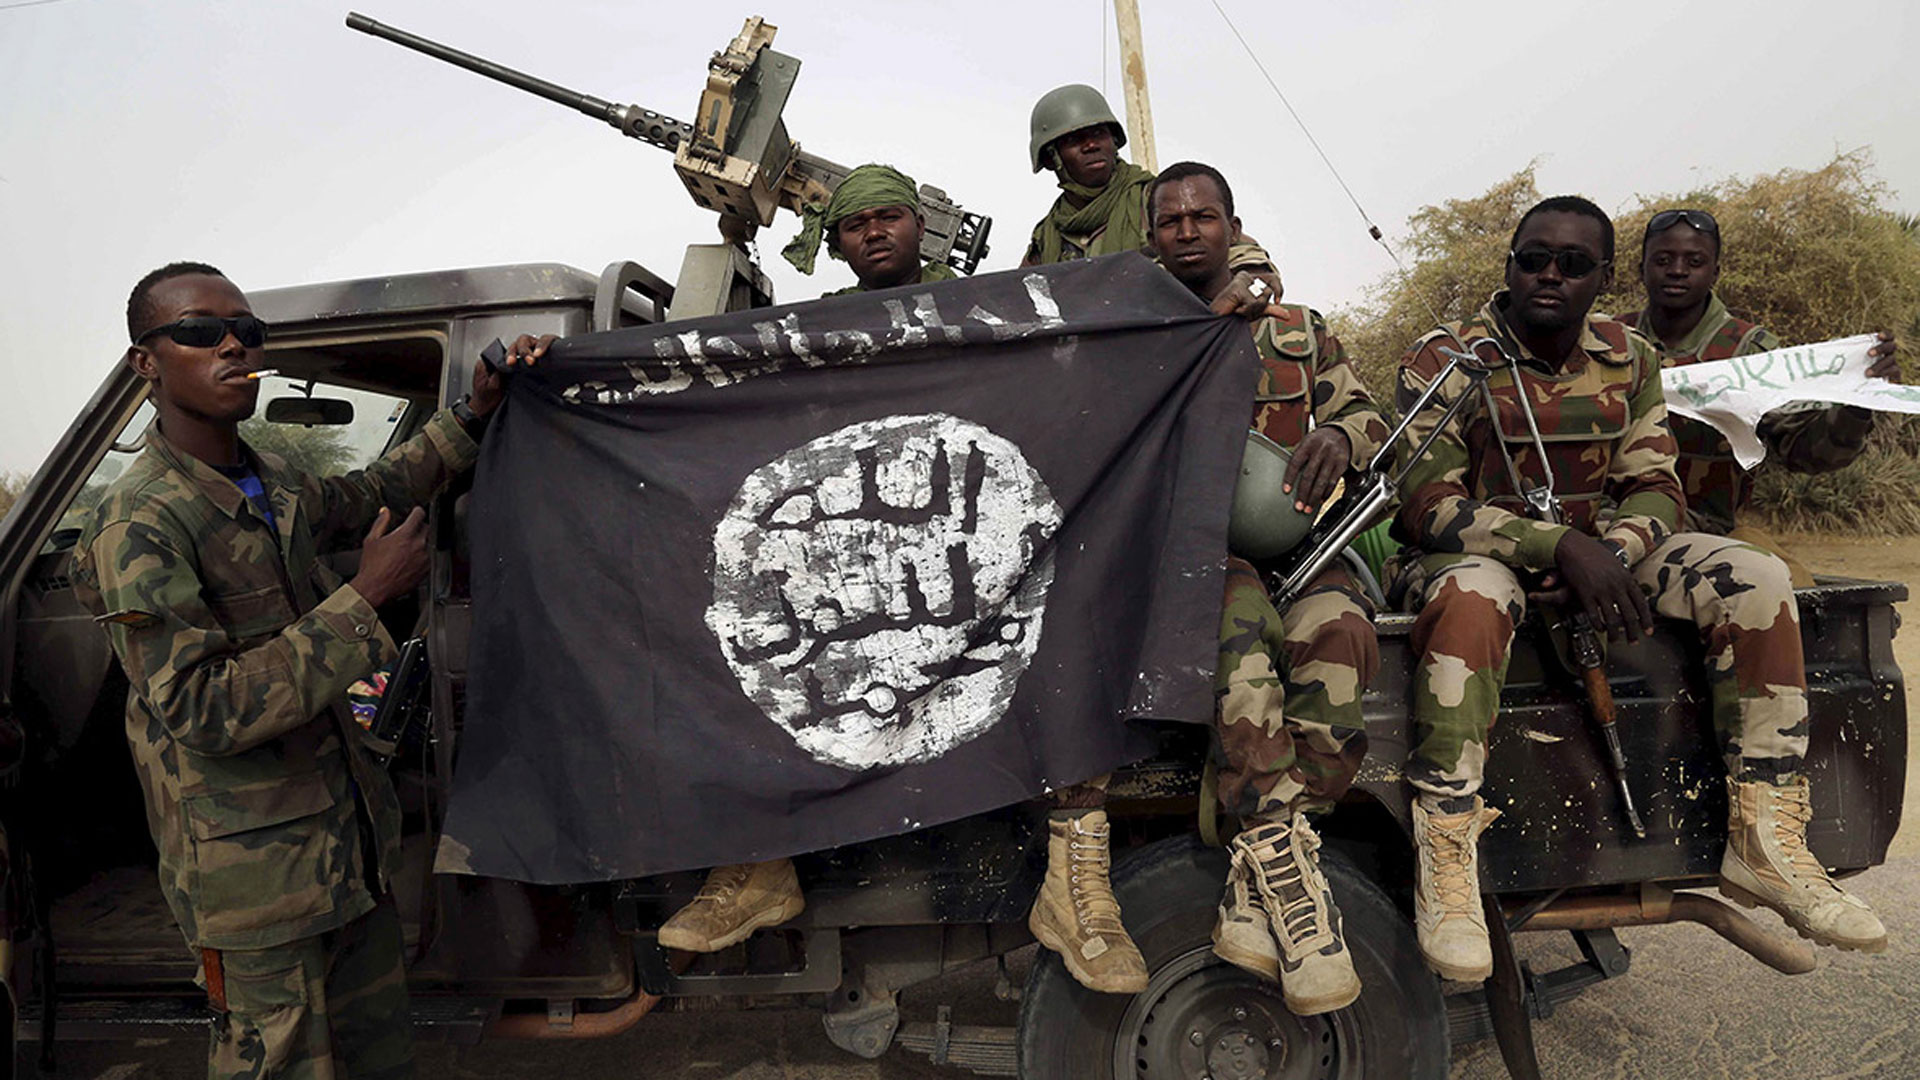 Soldiers show a Boko Haram flag